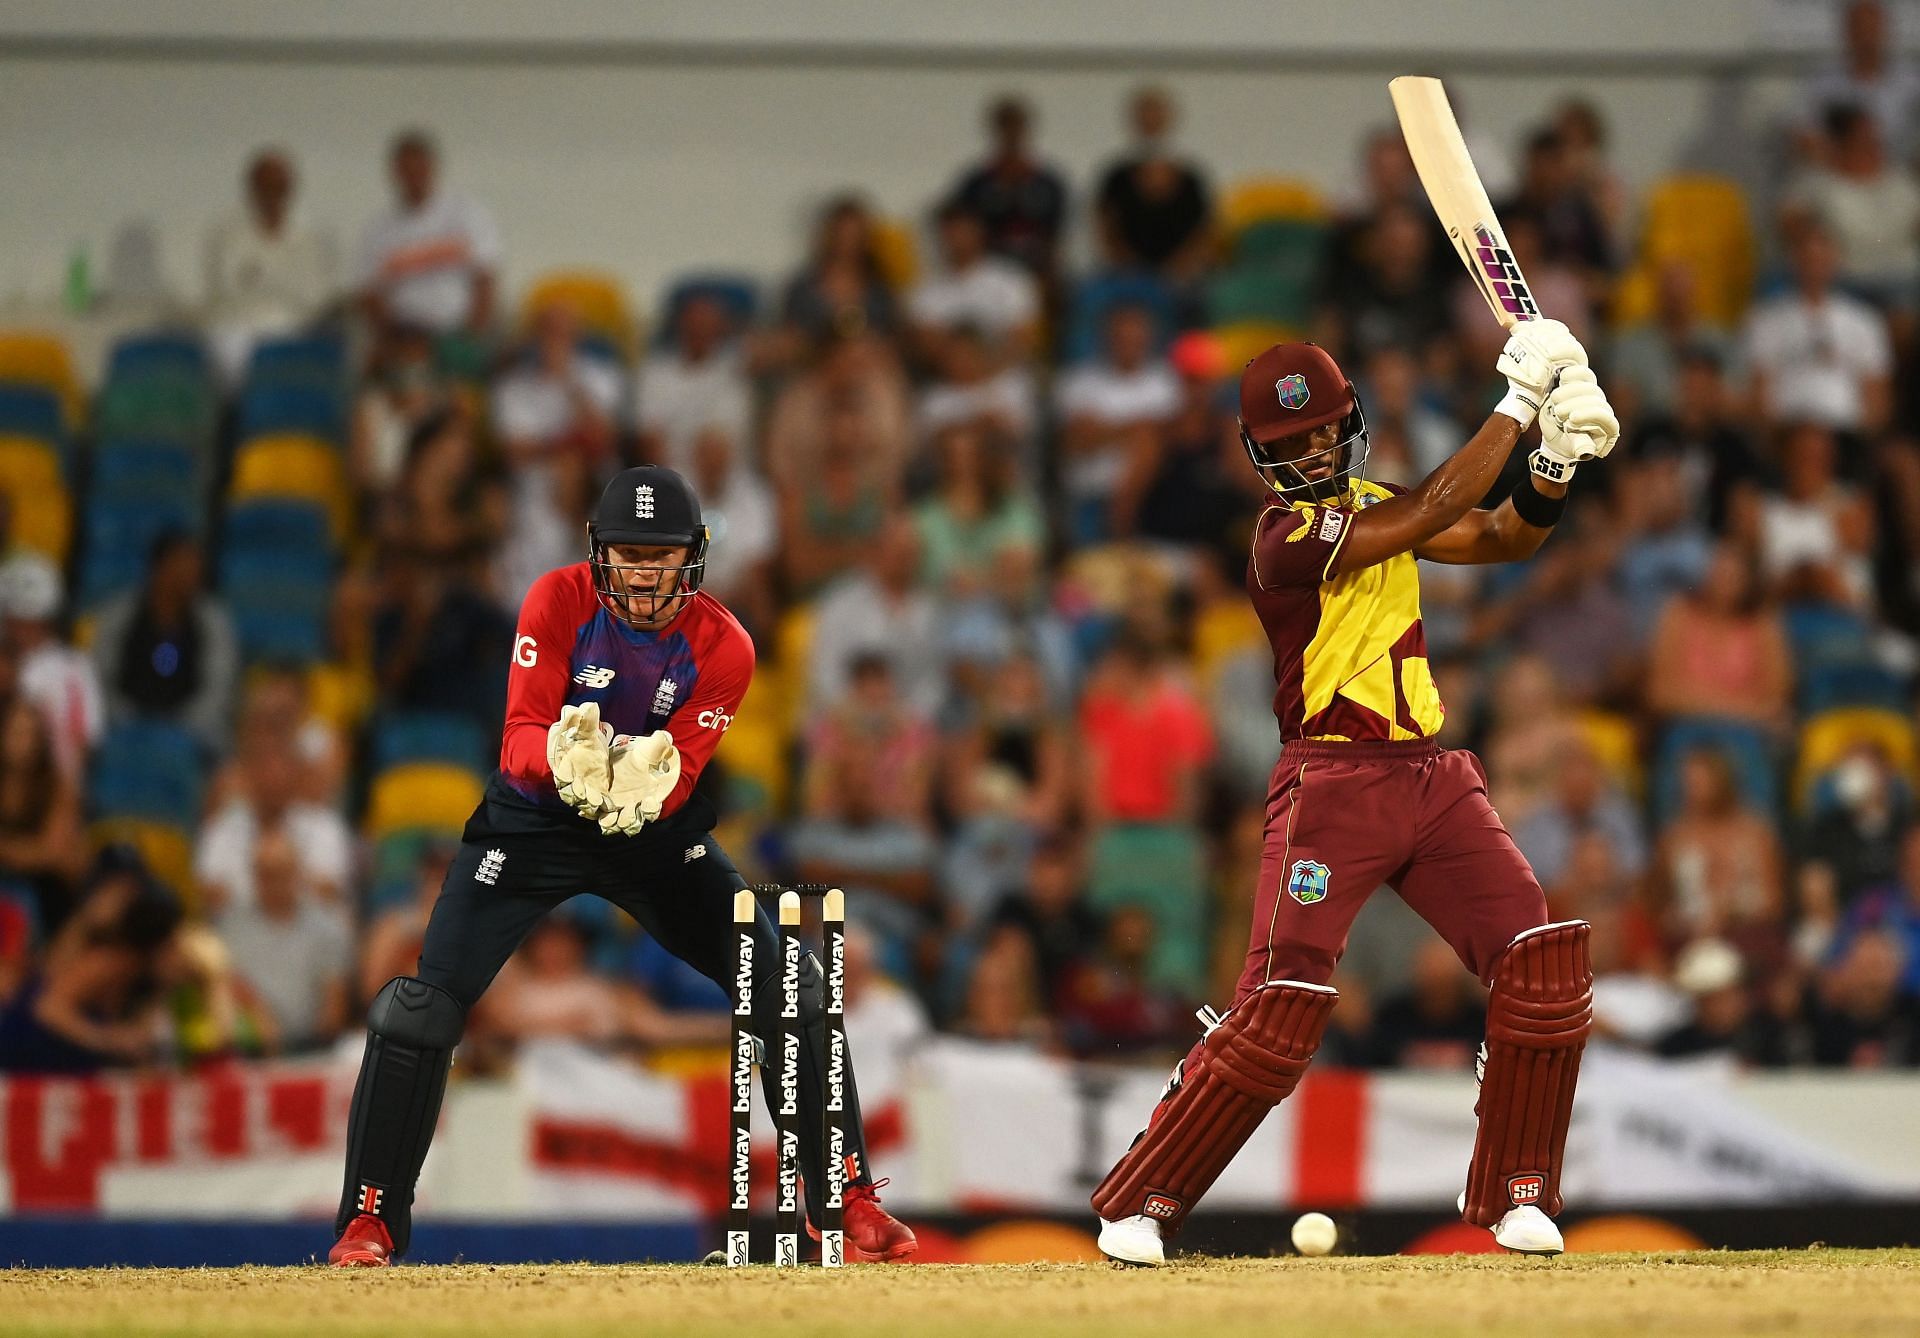 Shai Hope is expected to perform well in the third match